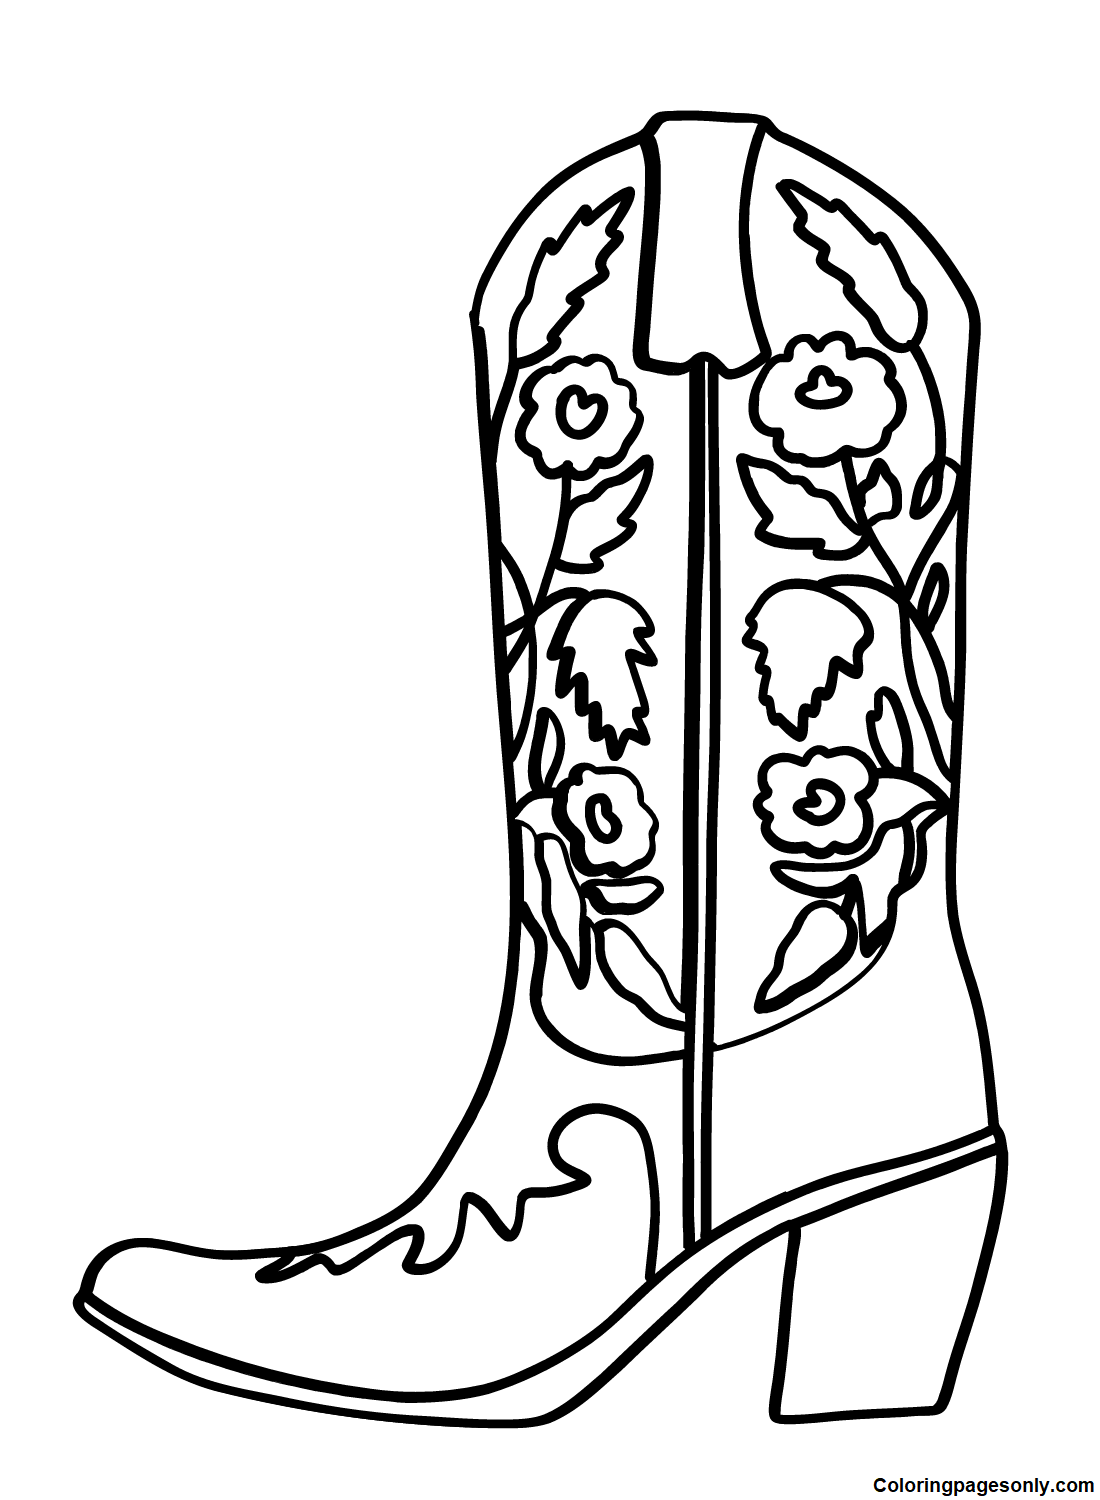 Boots Coloring Pages Free Printable Coloring Pages